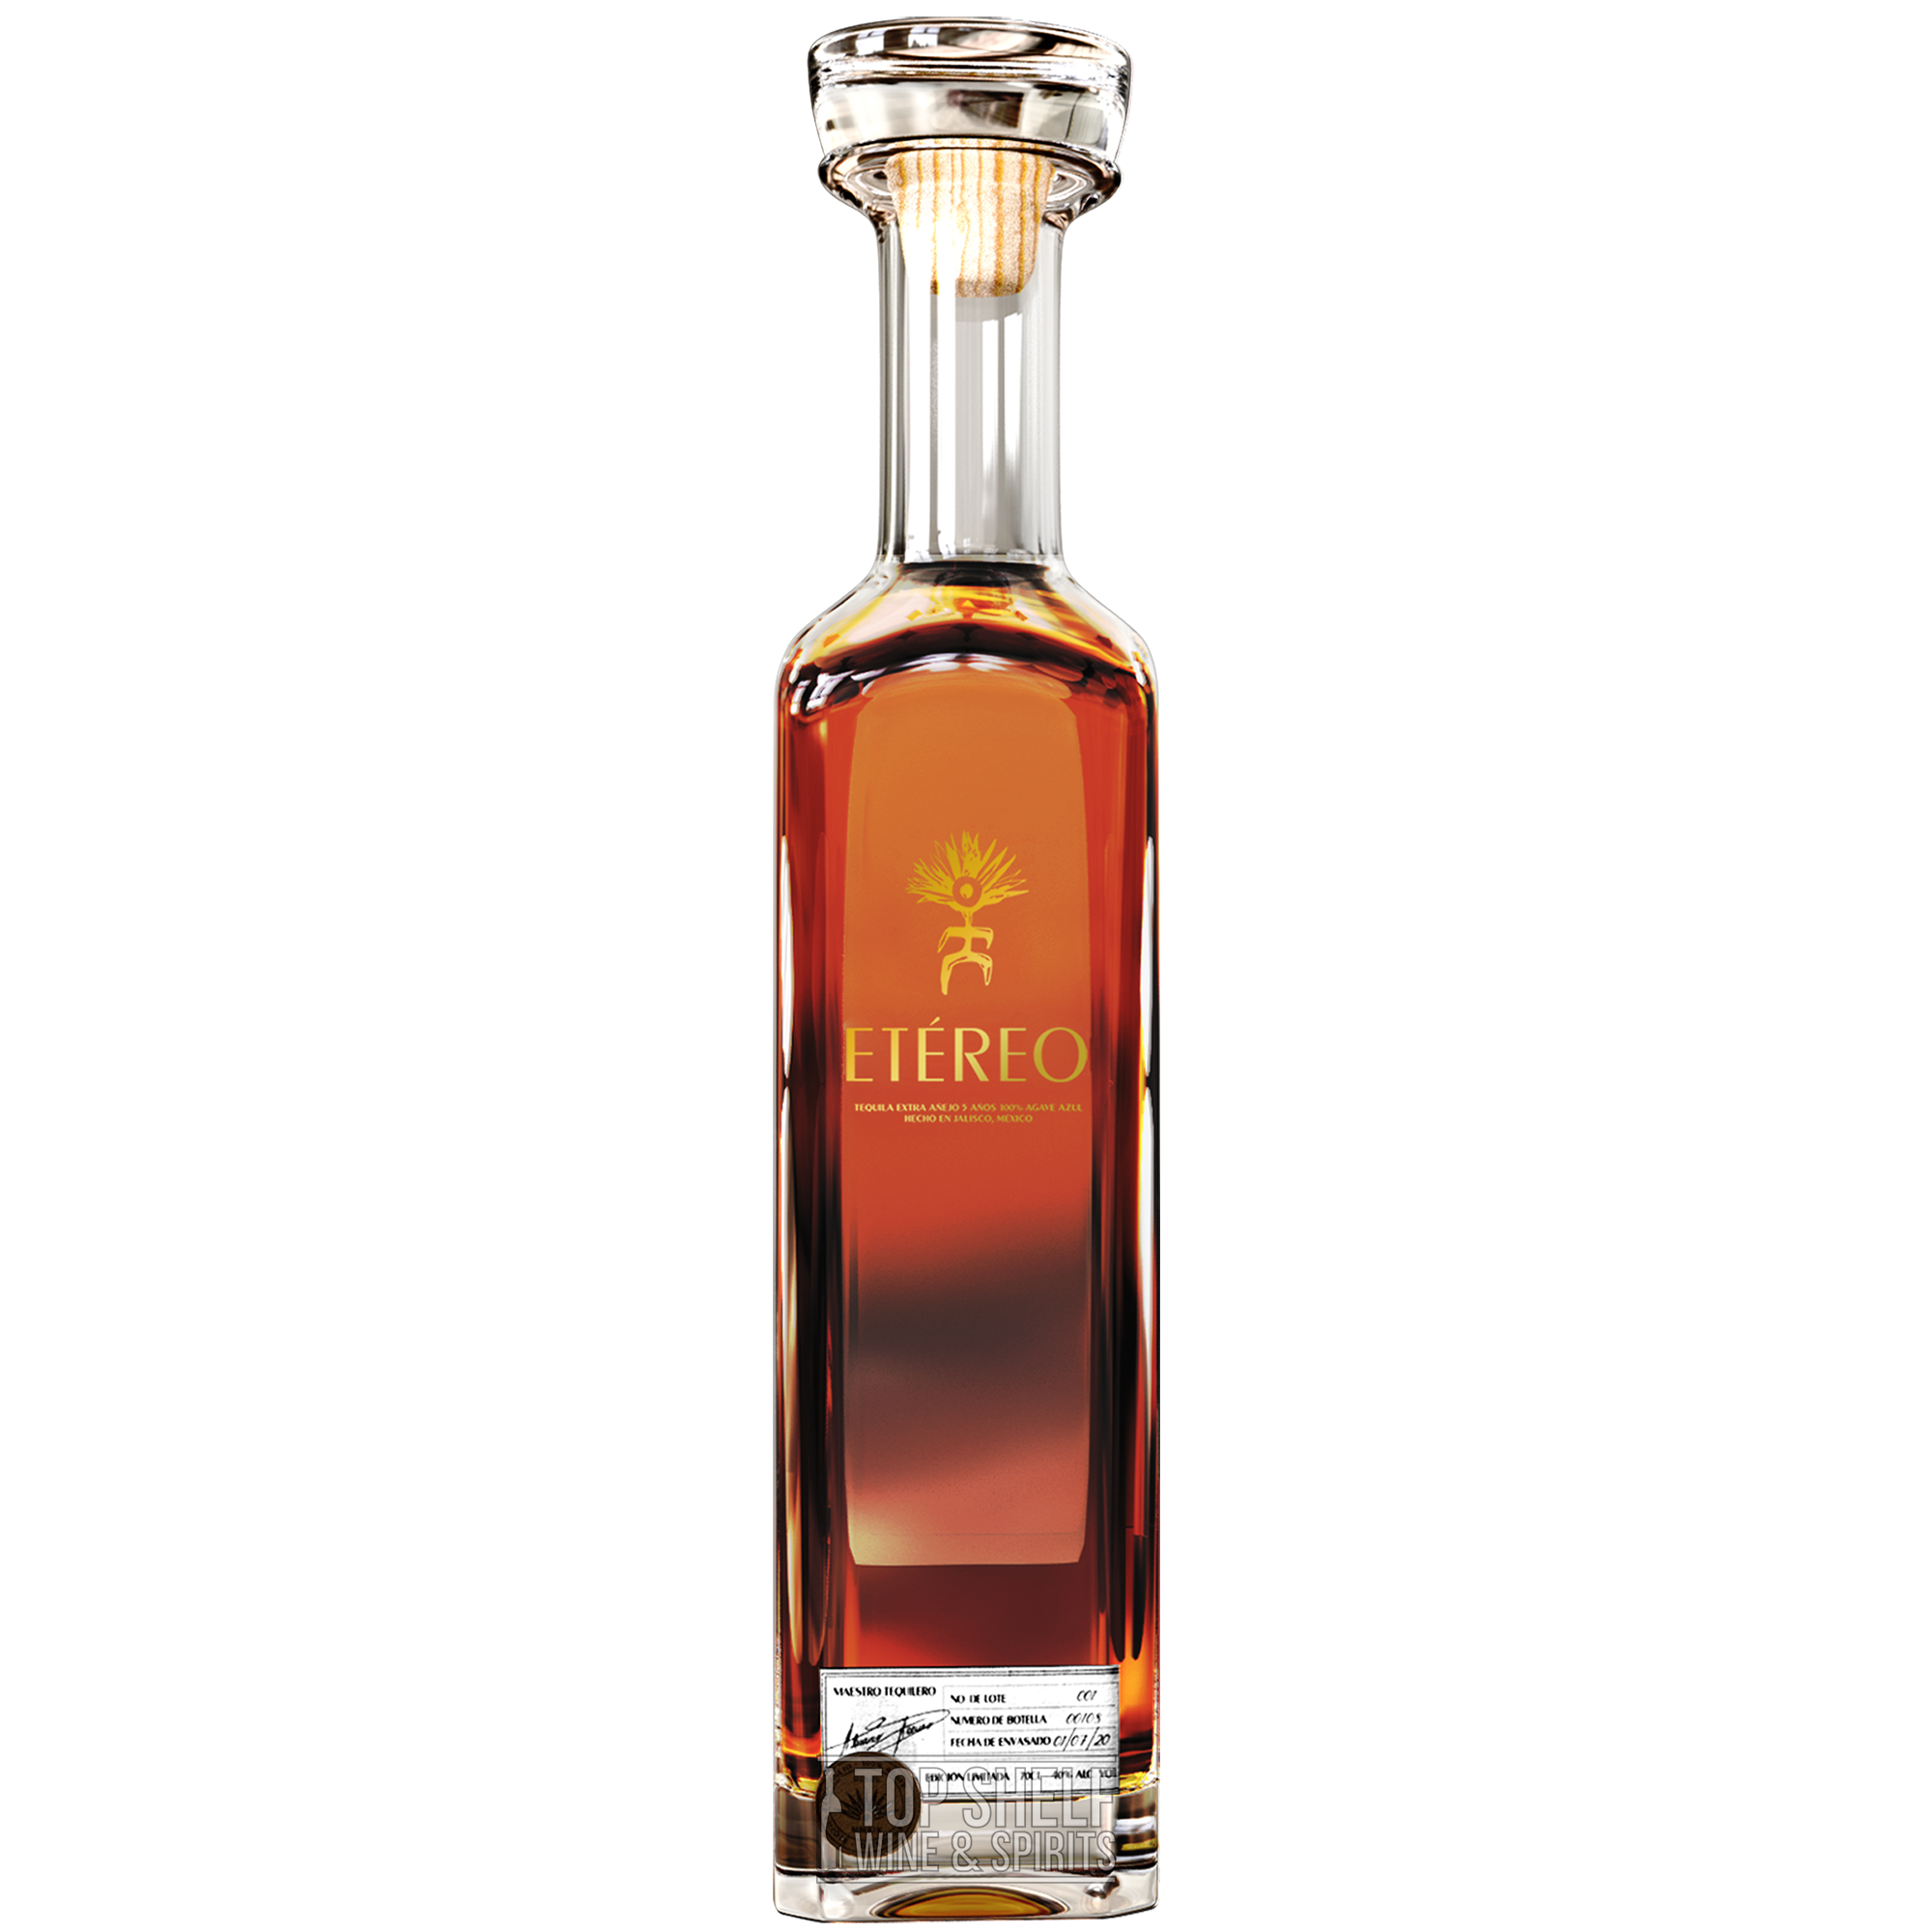 Etereo Tequila Extra Anejo 5 Year